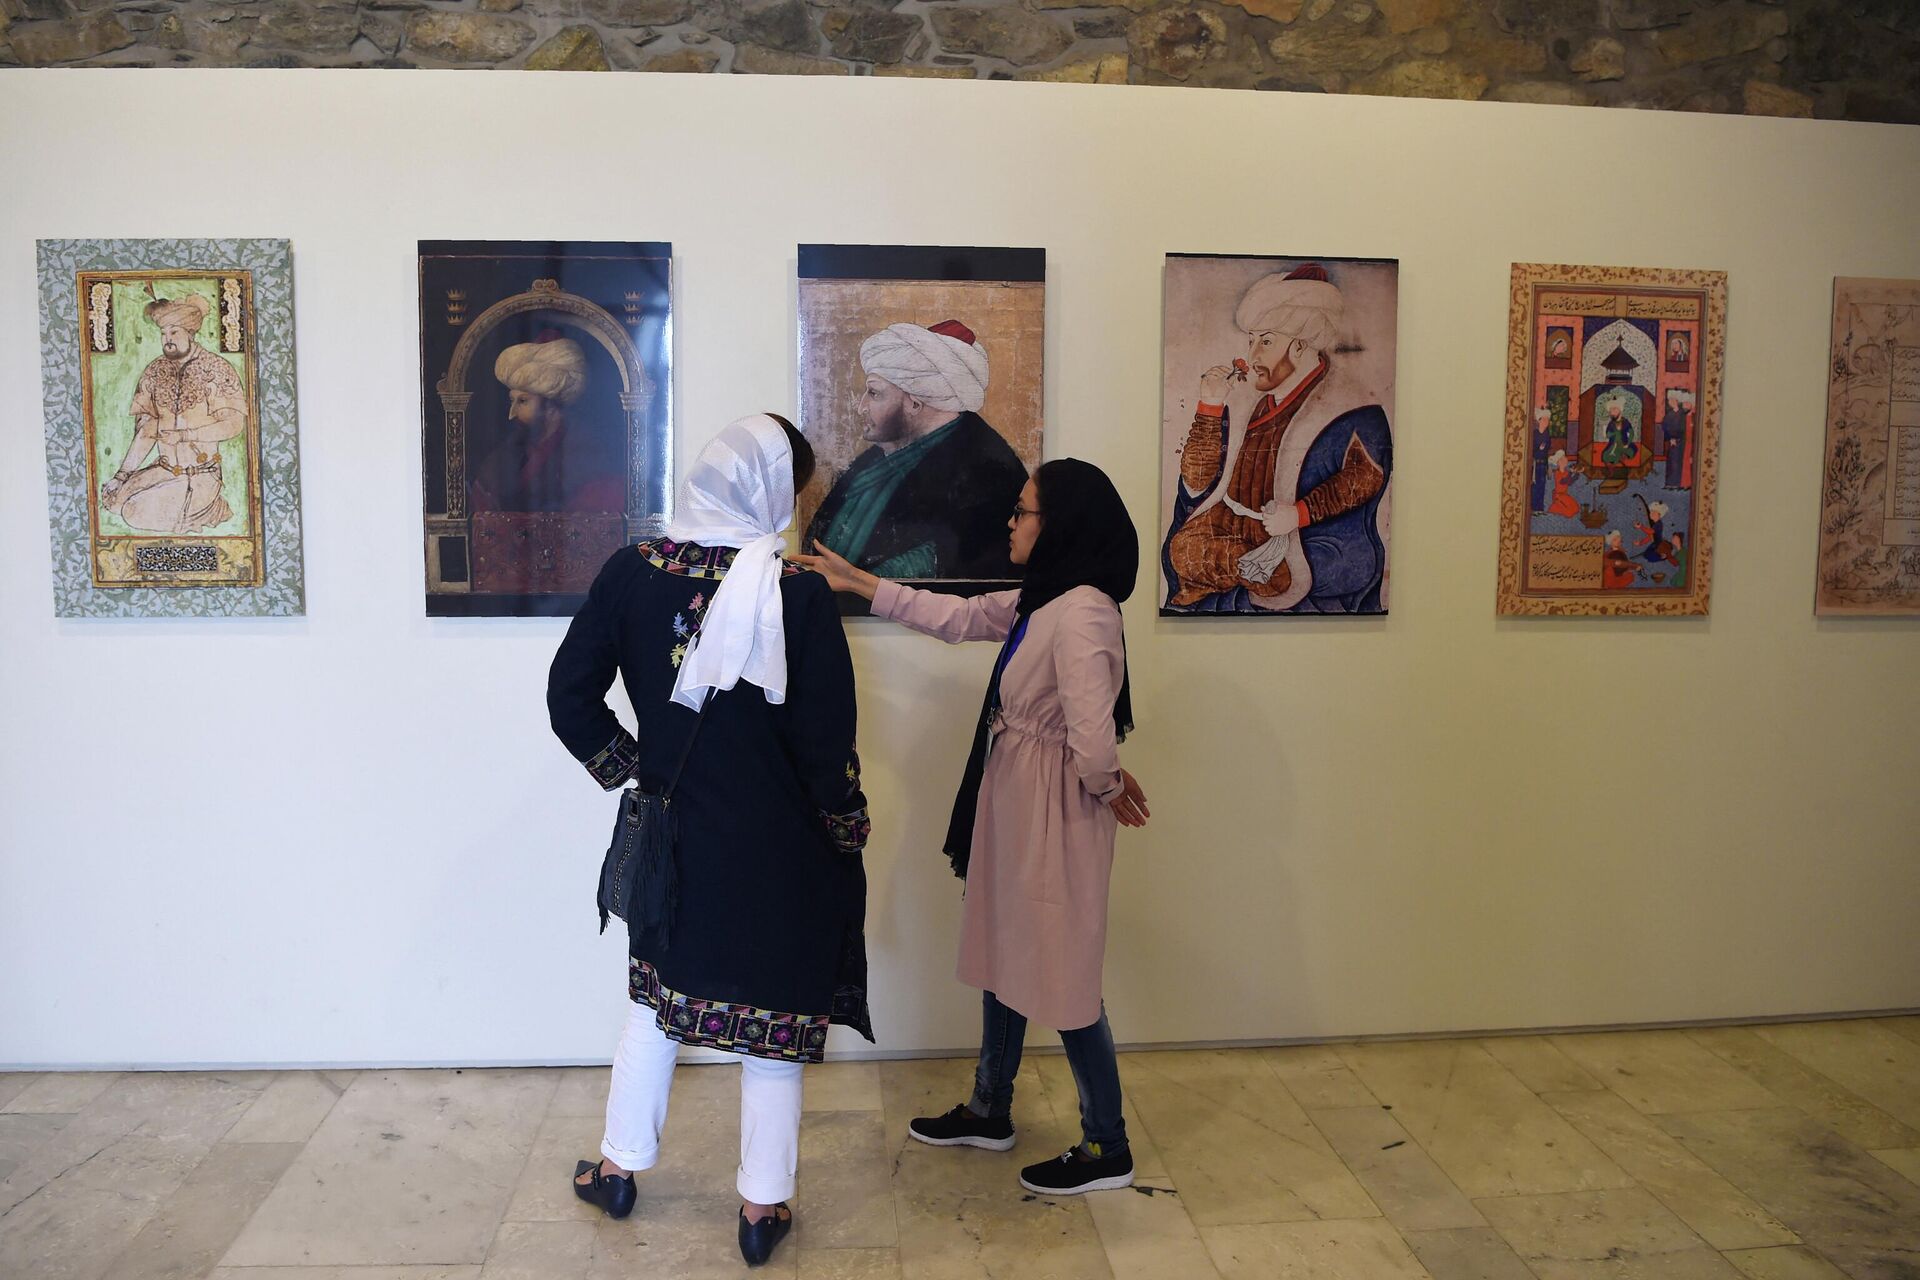 In this photograph taken on April 15, 2018, Afghan visitors walk past a display of Mughal paintings at the 'King Babur's Kabul, Cradle of the Mughal Empire' exhibition at the Bagh-e-Babur Garden in Kabul. - Sputnik International, 1920, 13.09.2022